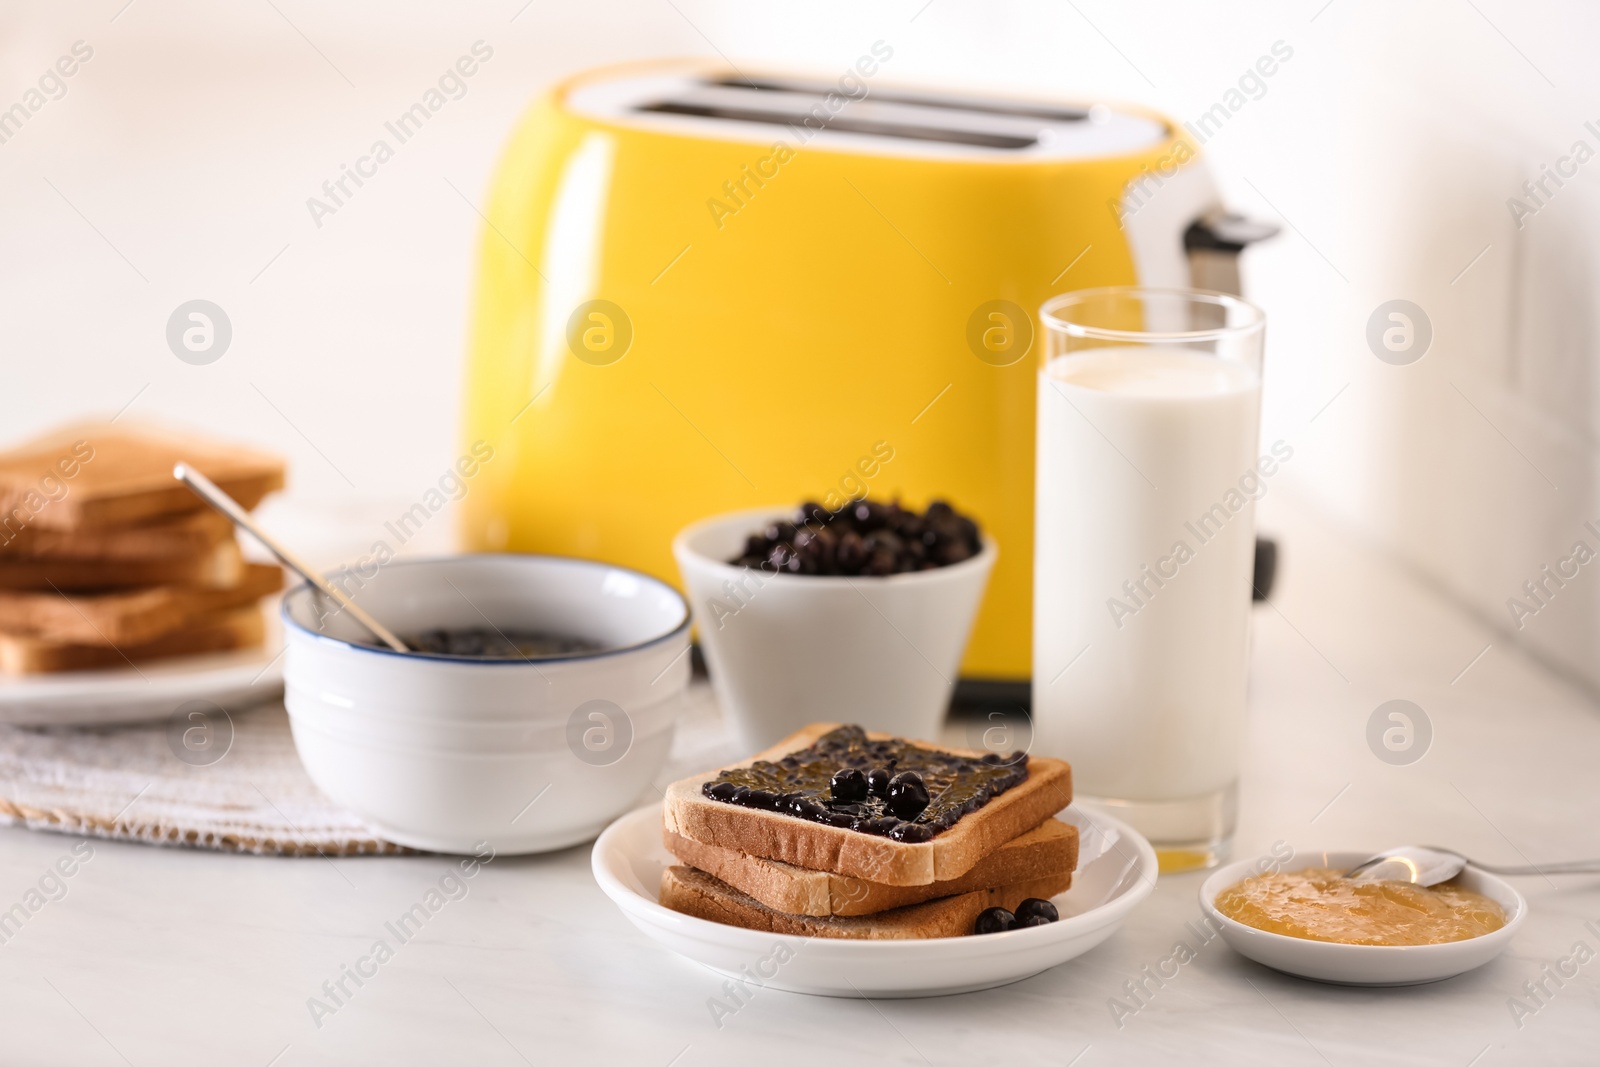 Photo of Modern toaster and delicious breakfast on table in kitchen